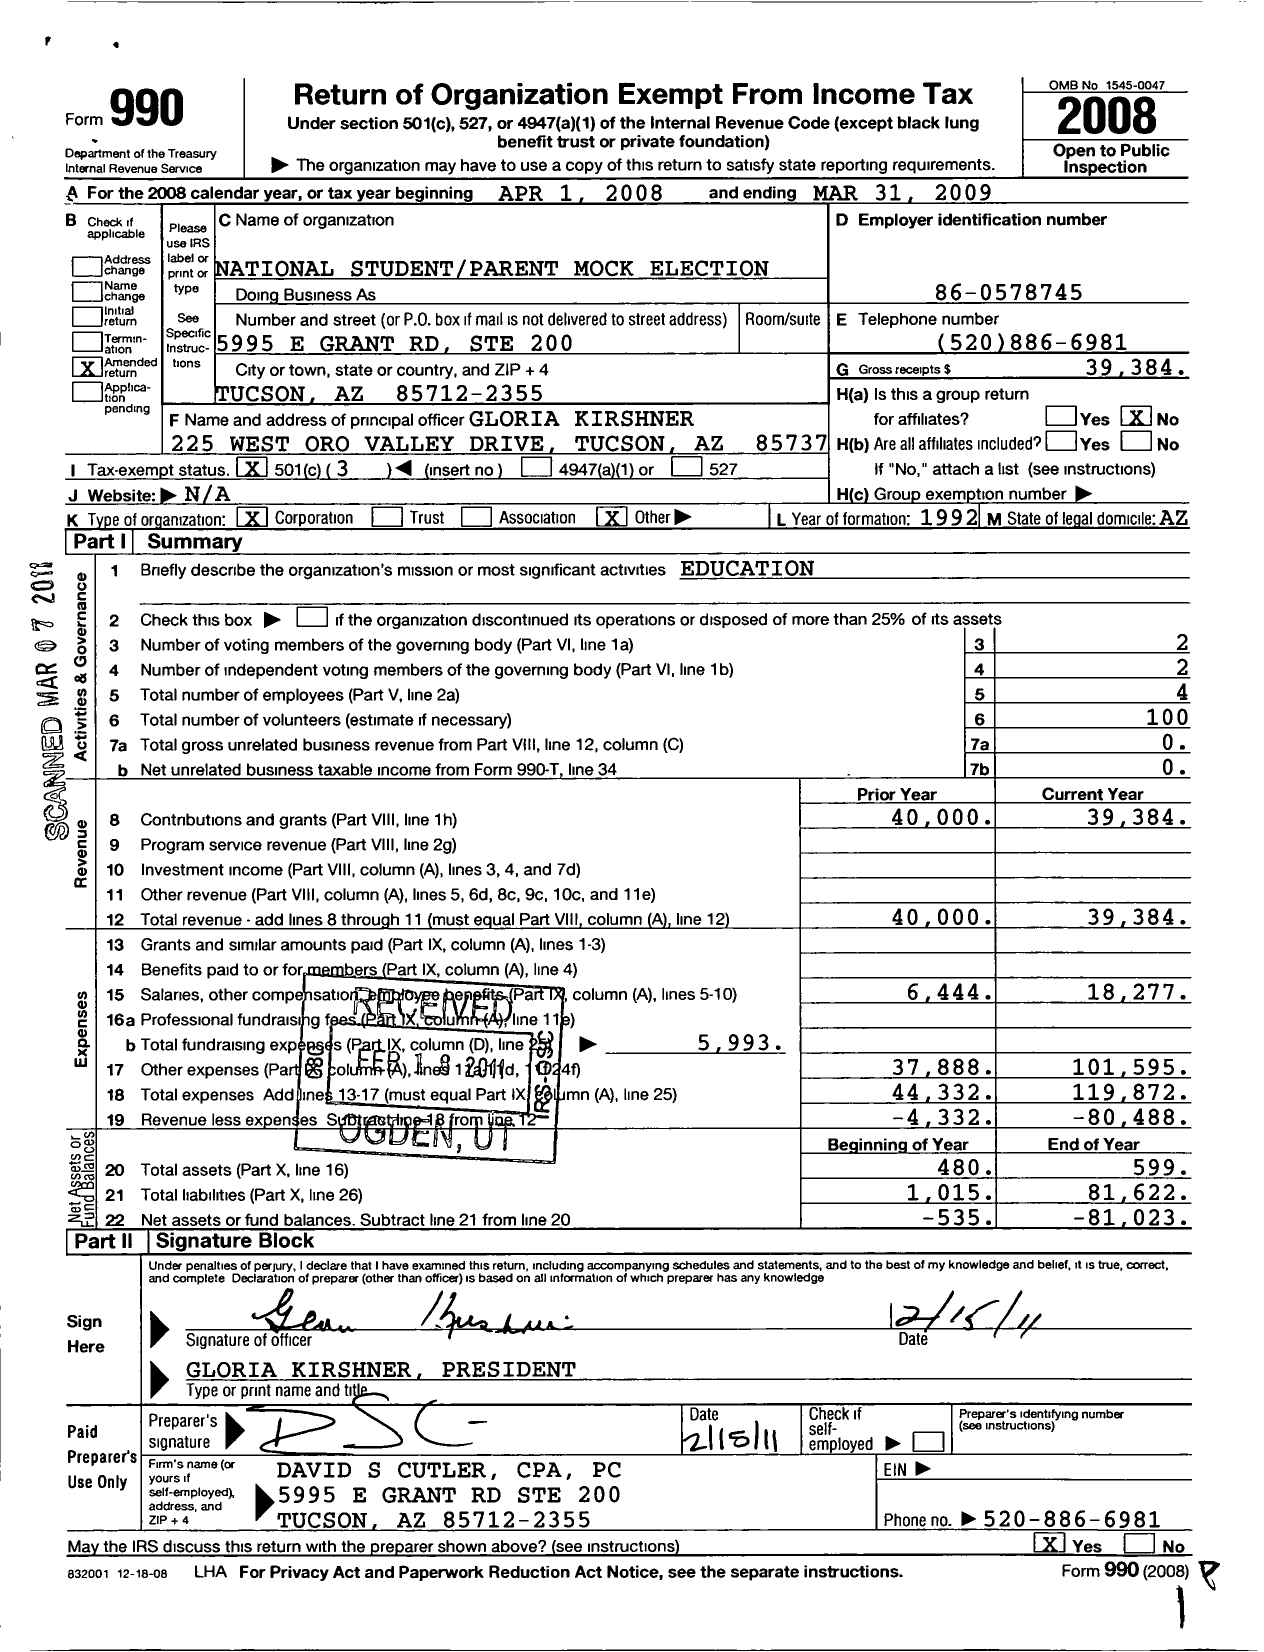 Image of first page of 2008 Form 990 for National Student Parent Mock Election